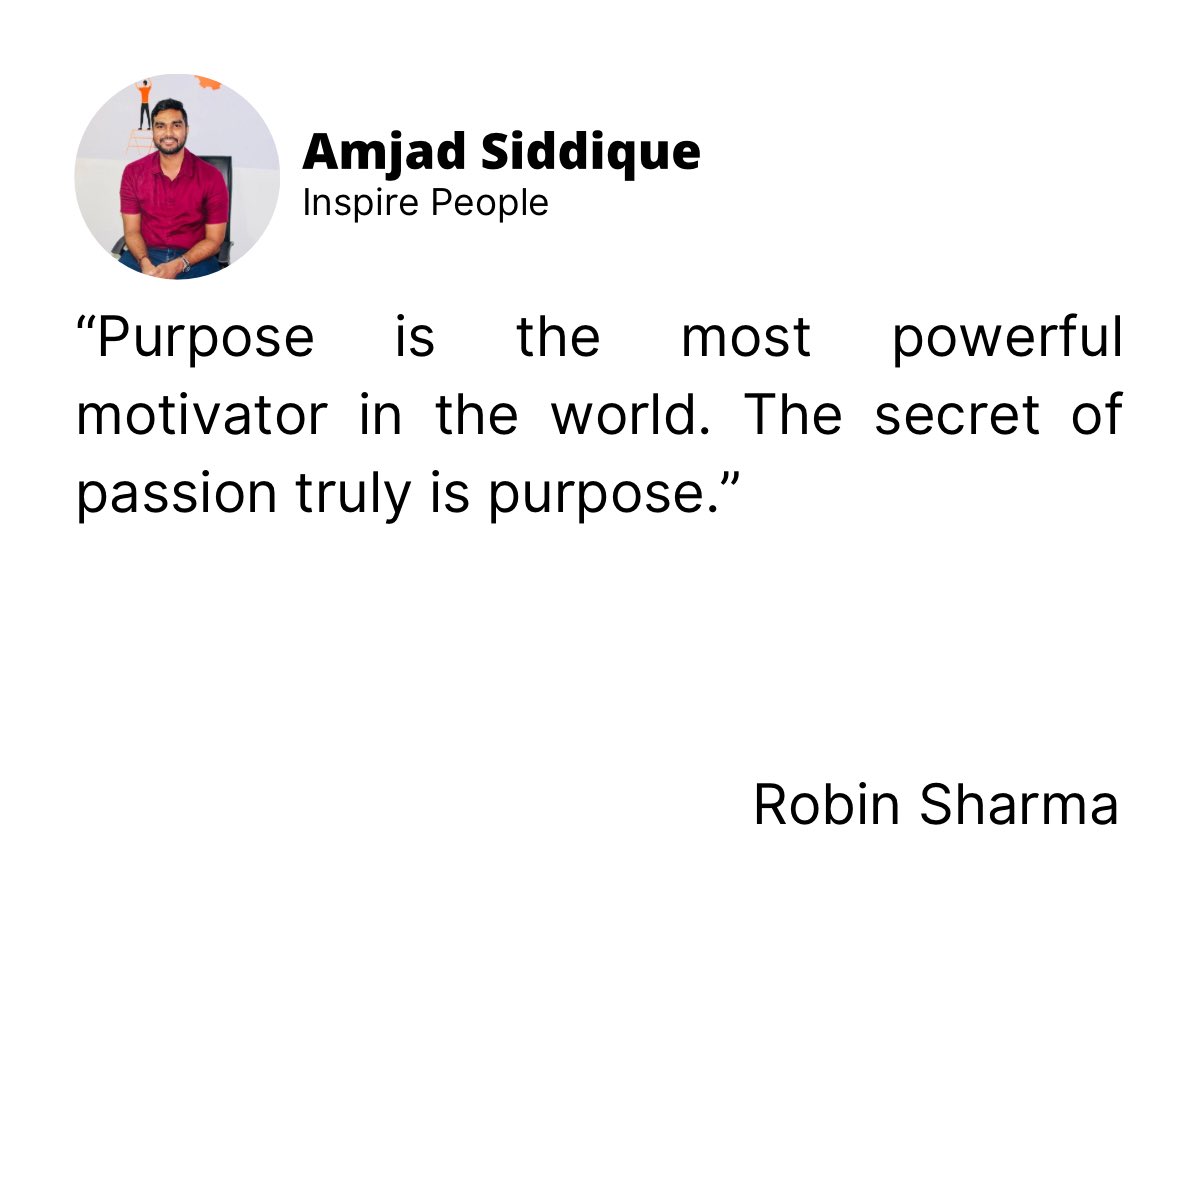 Learnings From My Reading Journey 📖               

What do you think? 🤔 please share your thoughts 💭, Thank you!

The Secret Letters of the Monk Who Sold His Ferrari 
Robin Sharma

For more updates follow - @amjad__siddique   

#readingbooks #education #amjadsiddique